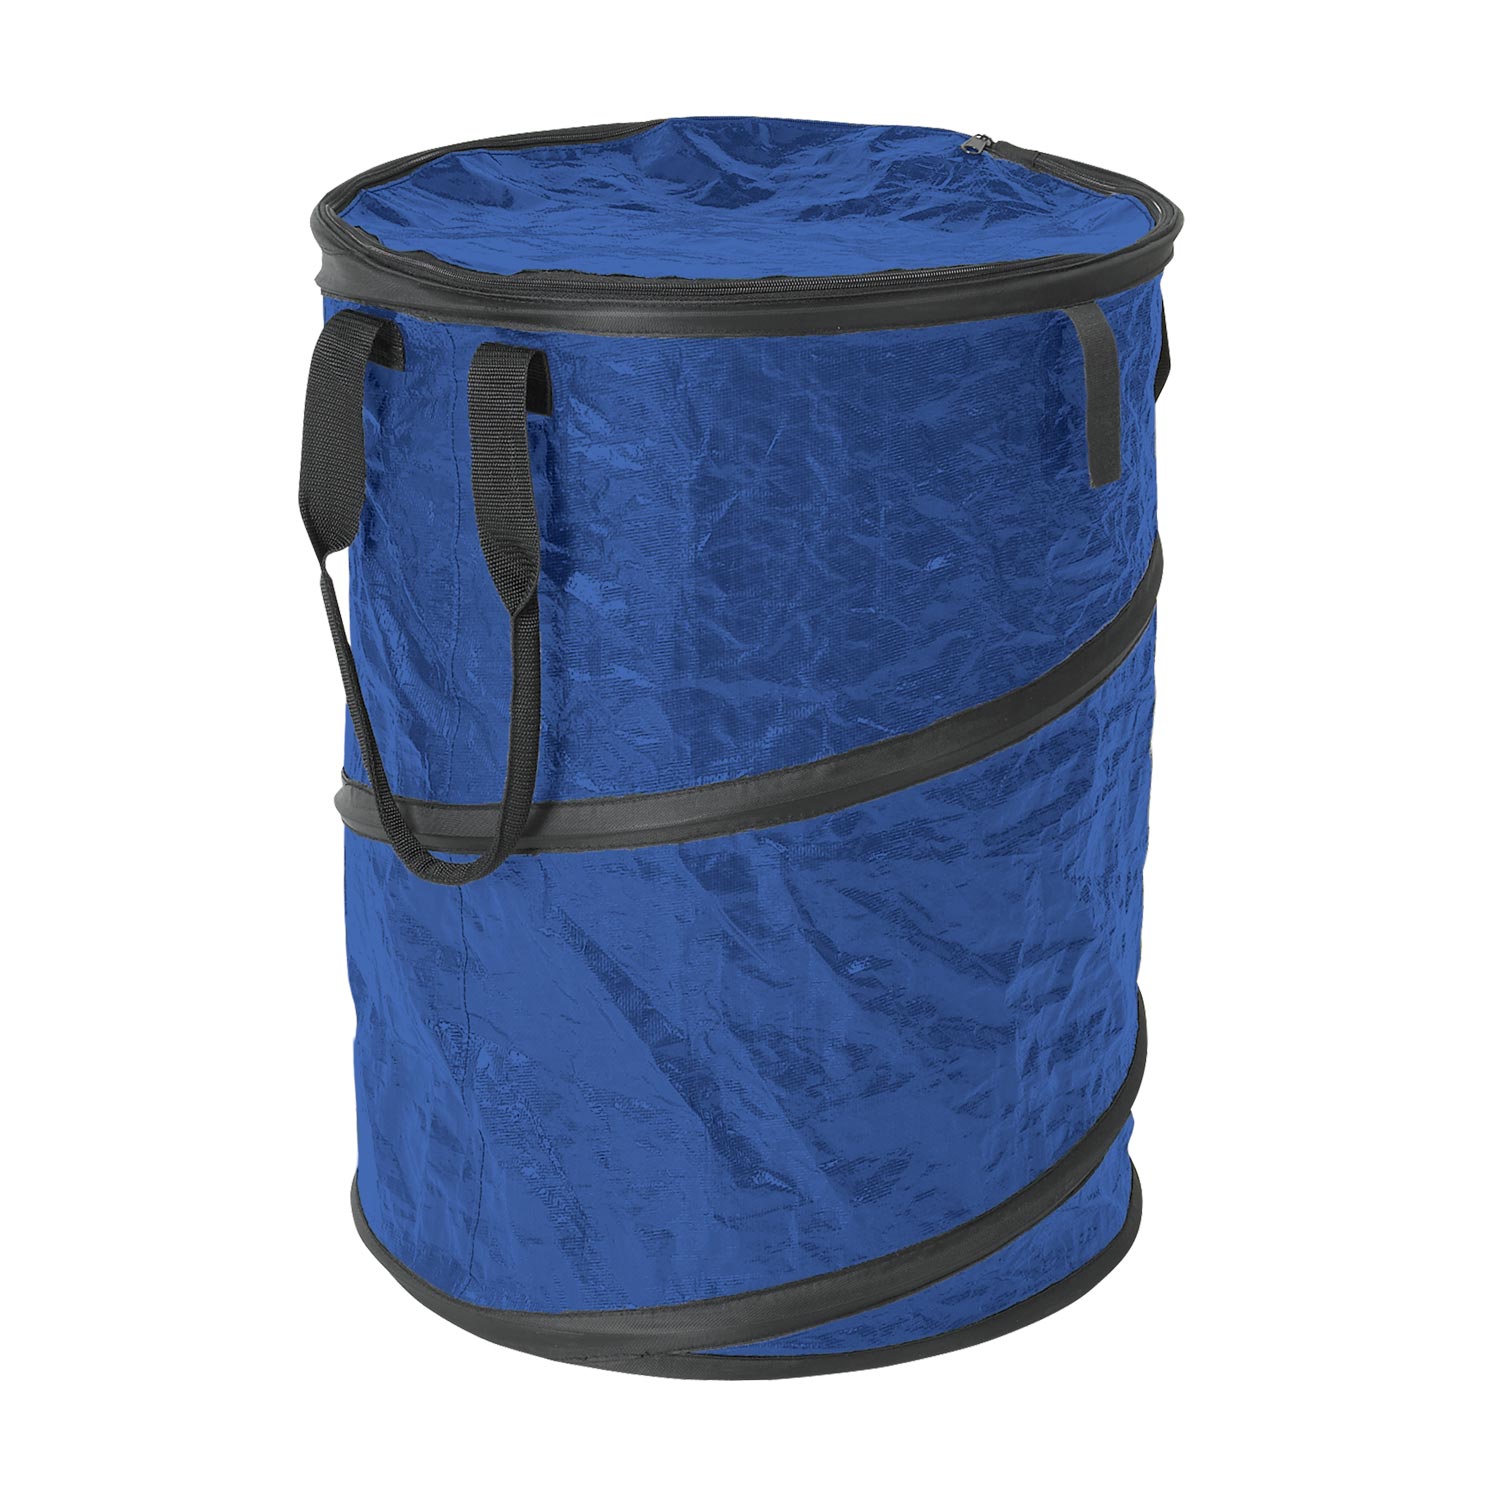 Collapsible Campsite Carry-All / Trash Can - Blue